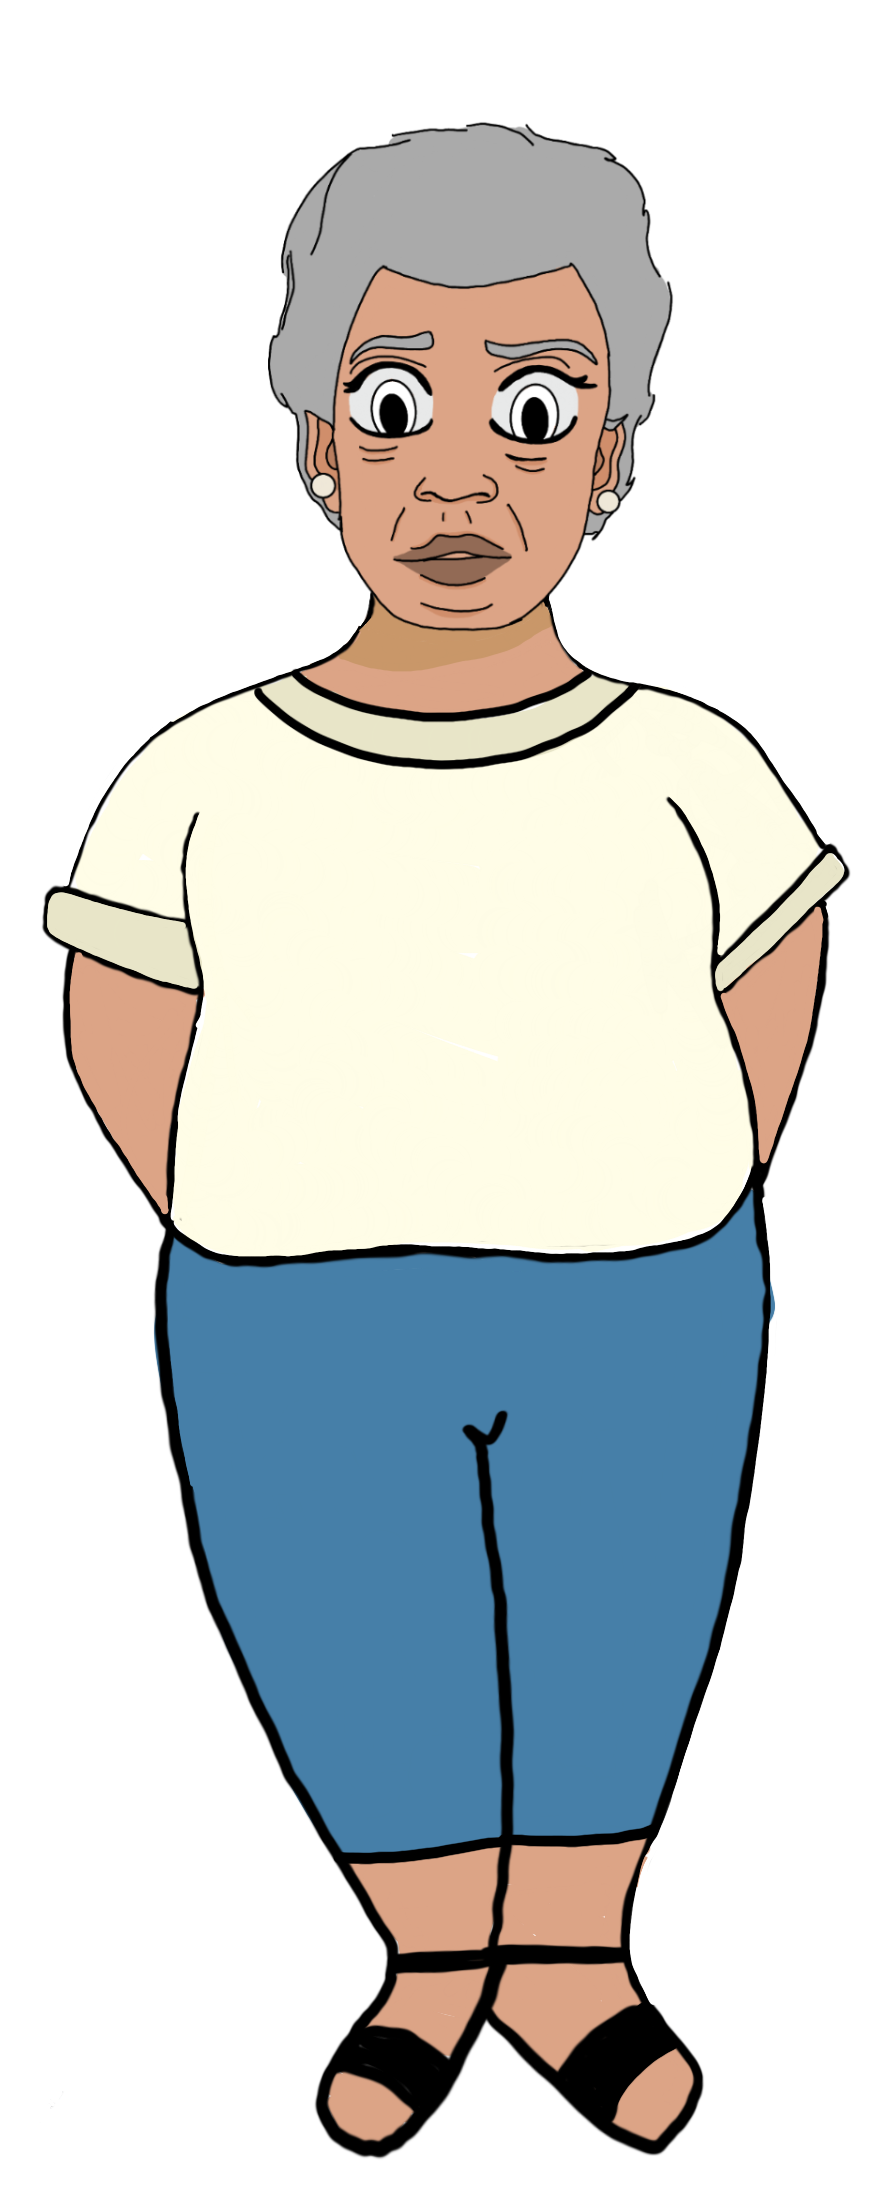 Full-length illustration of an elderly woman cartoon character with gray hair, wearing a white blouse and blue skirt, with a surprised expression.